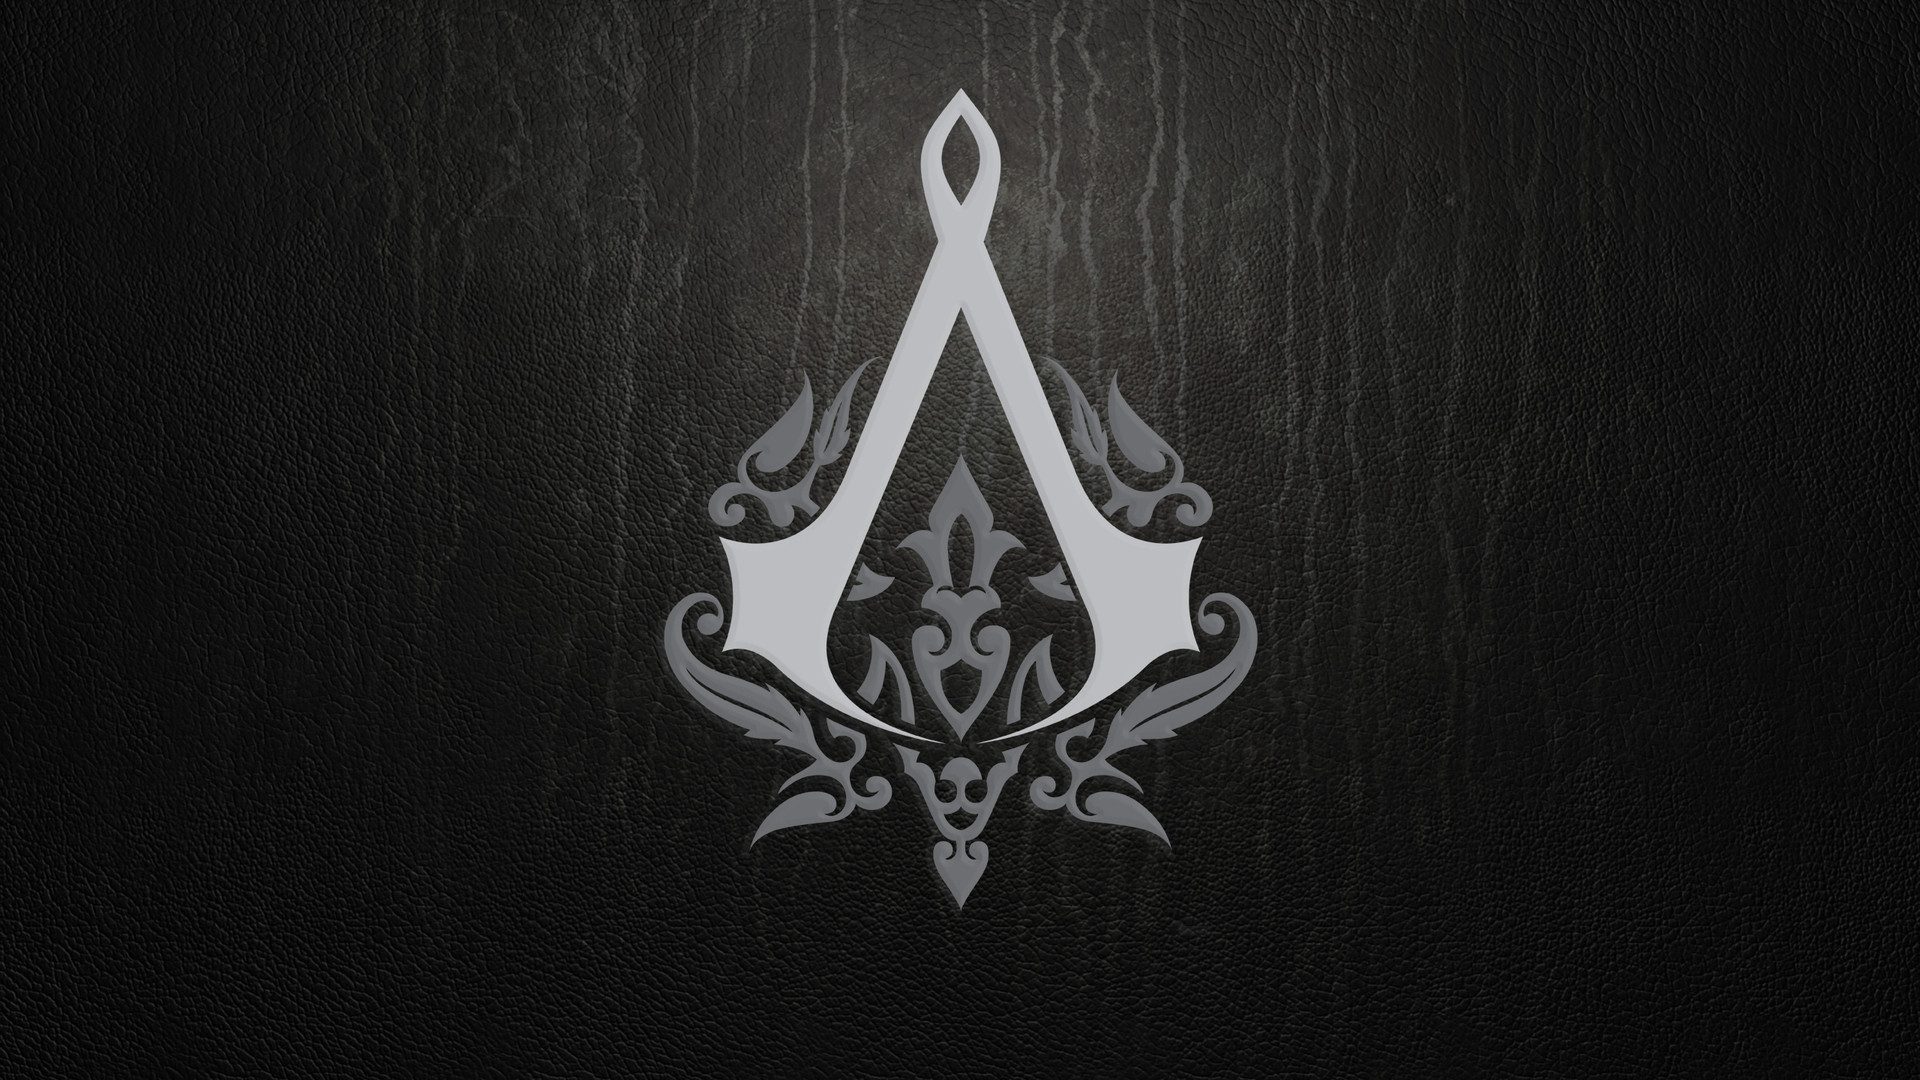 Users who found this page were searching for wolf wappen wallpaper android h d black logo wallpaper assassins creed symbol wallpaper android HD